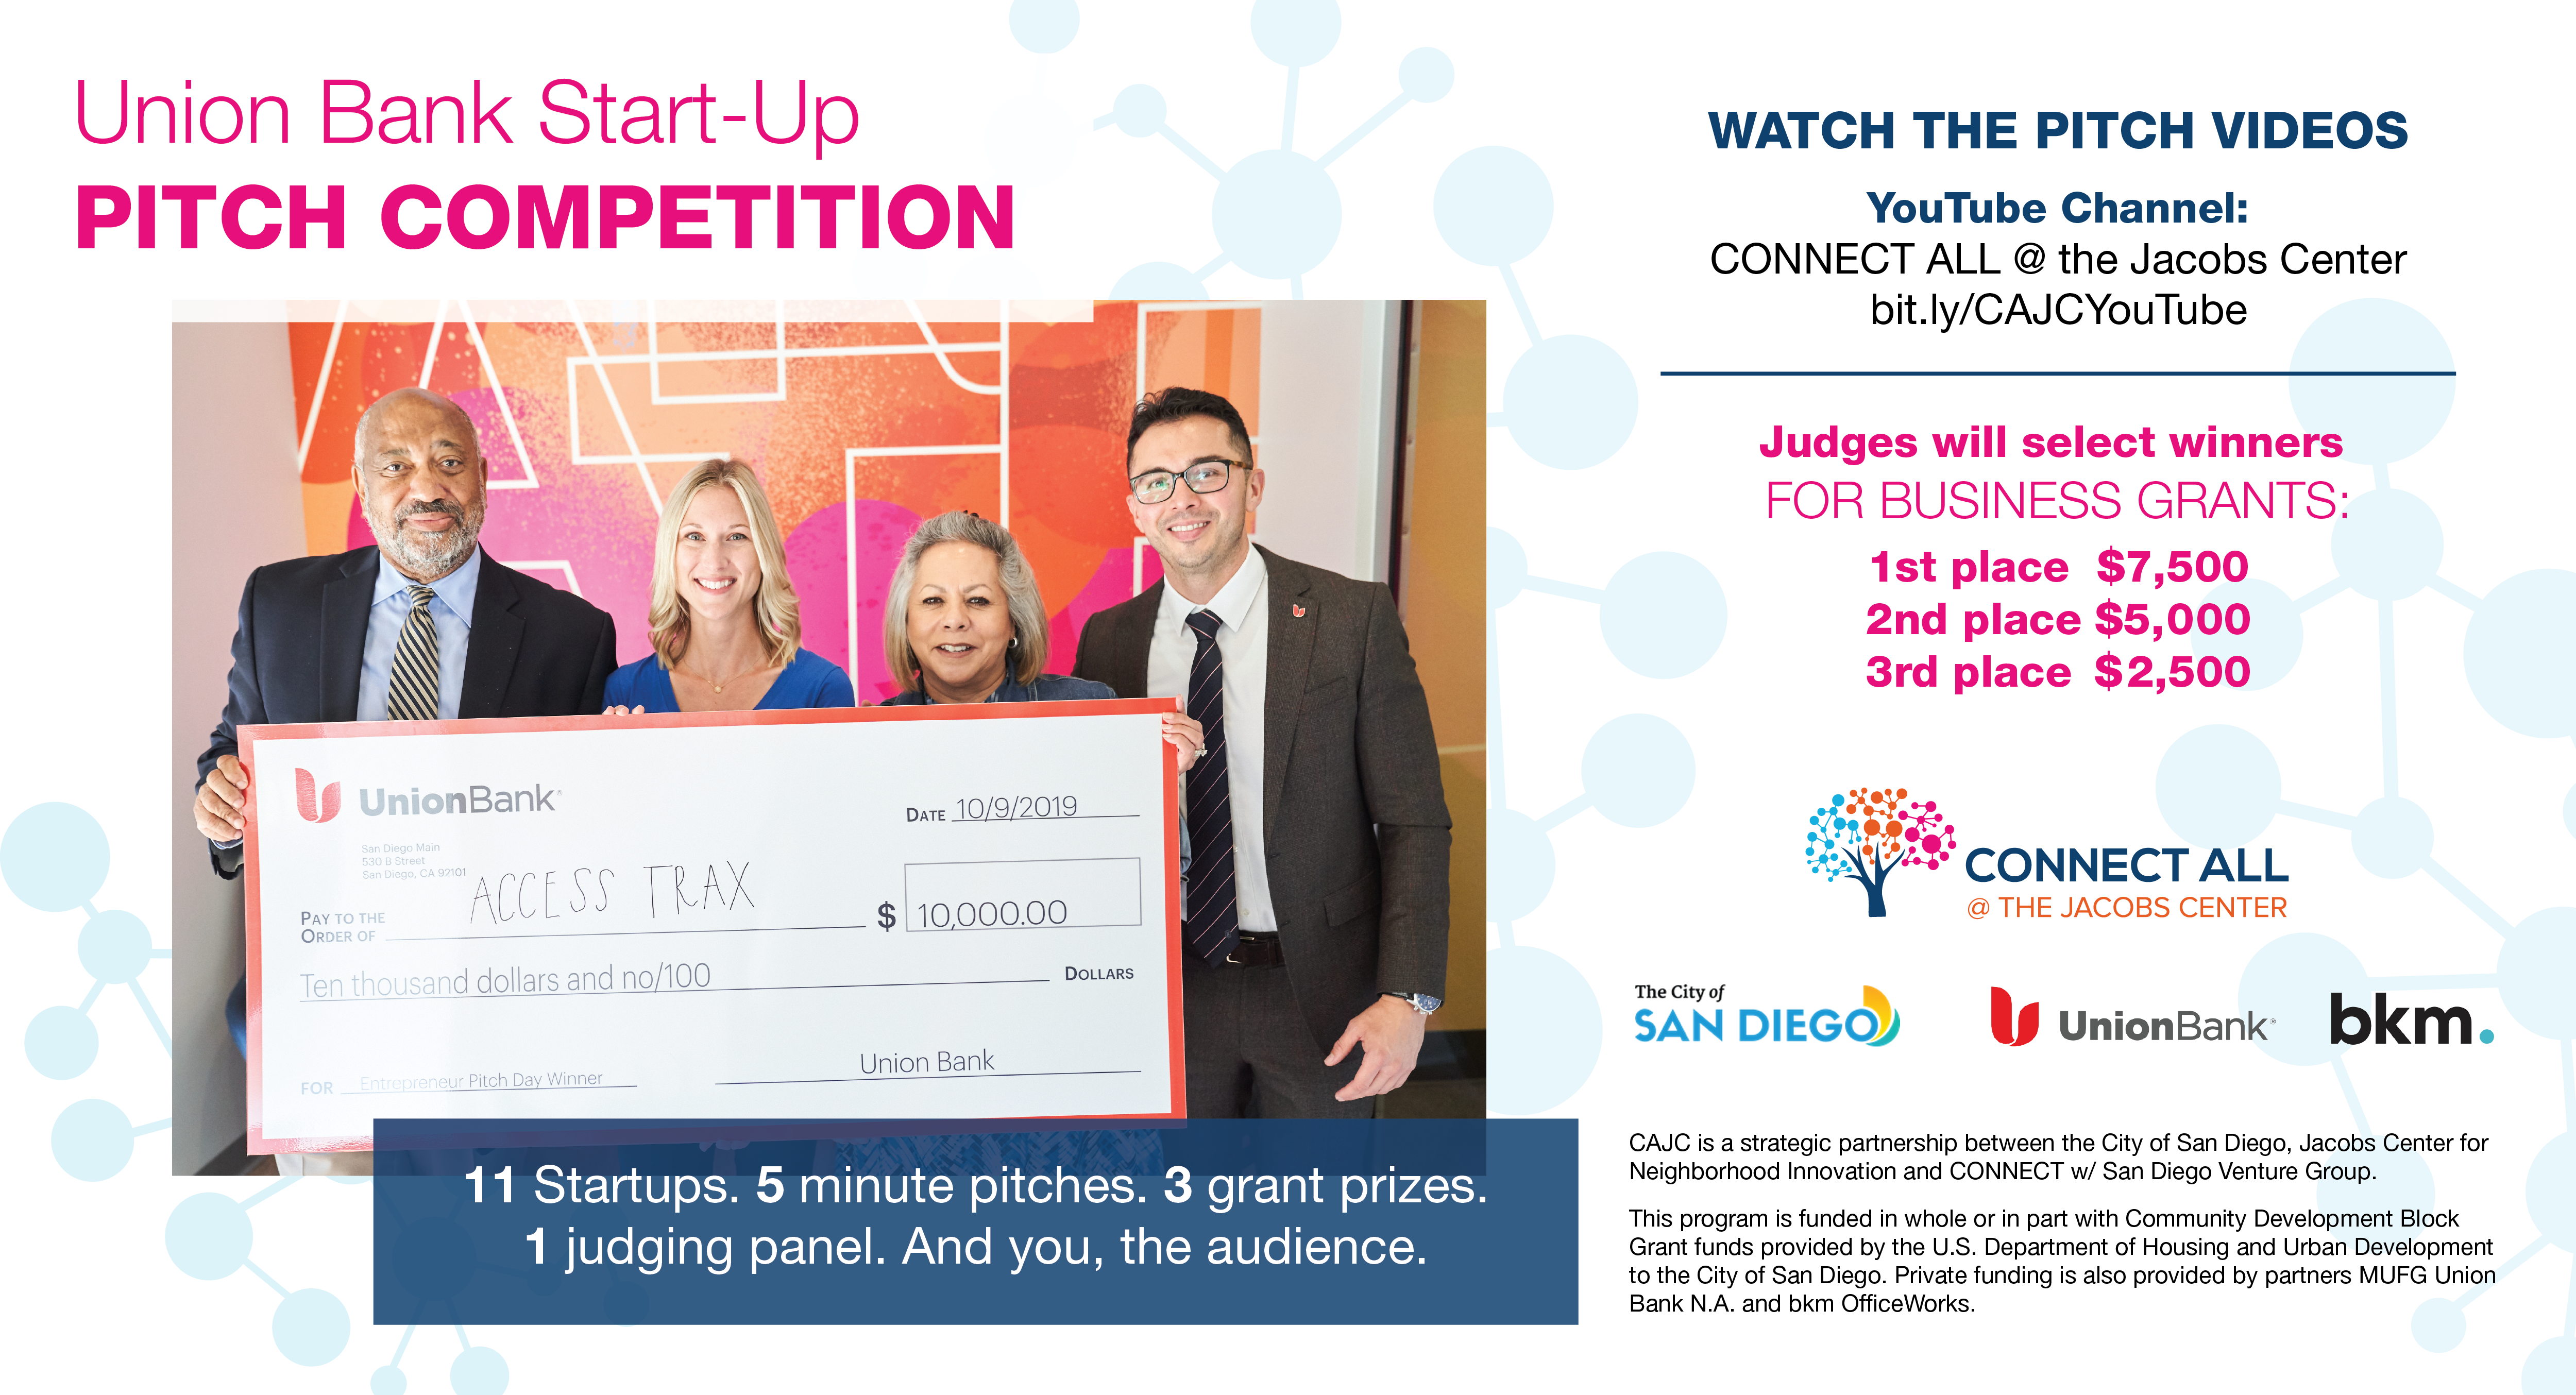 Watch the Pitch Videos on the CONNECT ALL @ the Jacobs Center YouTube chanel at bit.ly/CAJCYouTube. Judges will select winners for business grants. First place gets $7,500. Second place gets $5,000. Third place gets $2,500.